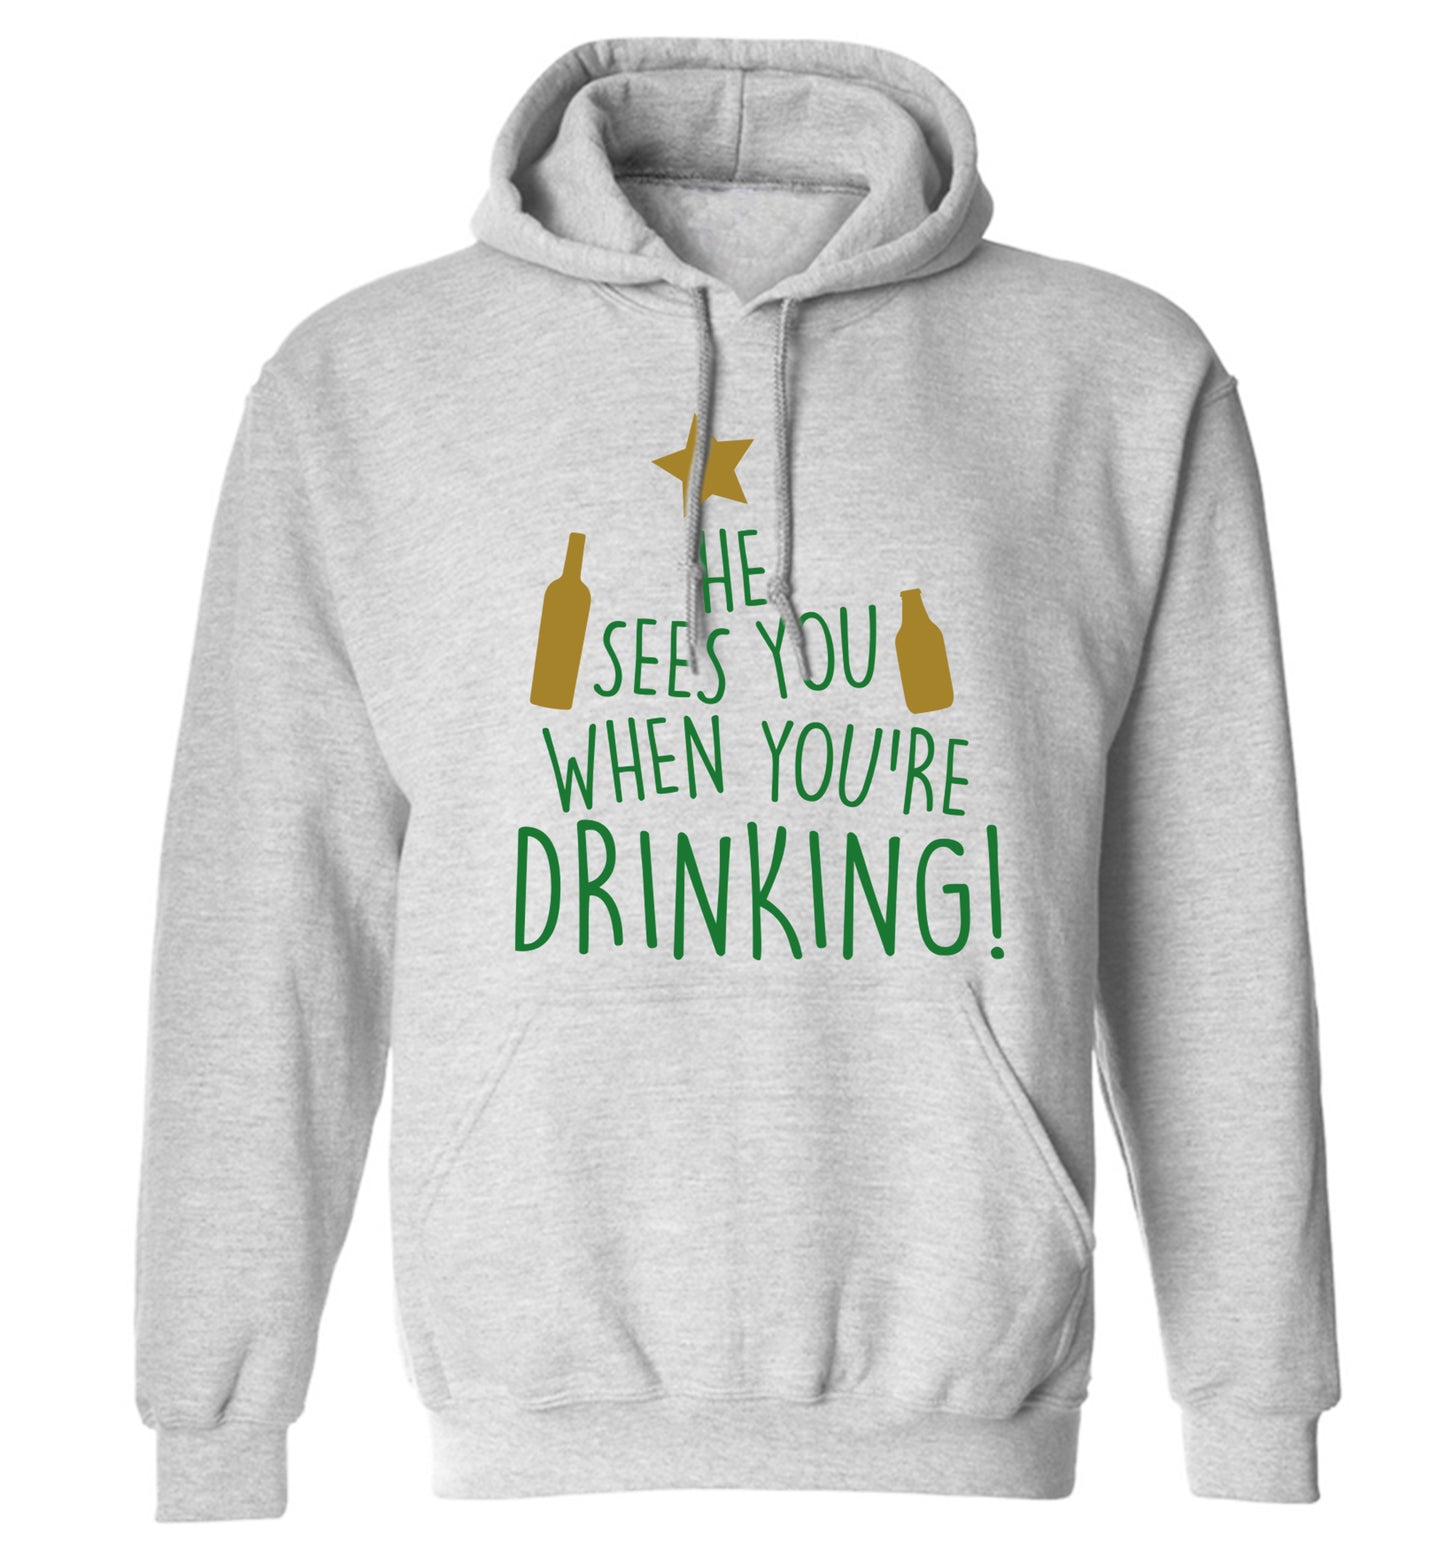 He sees you when you're drinking adults unisex grey hoodie 2XL